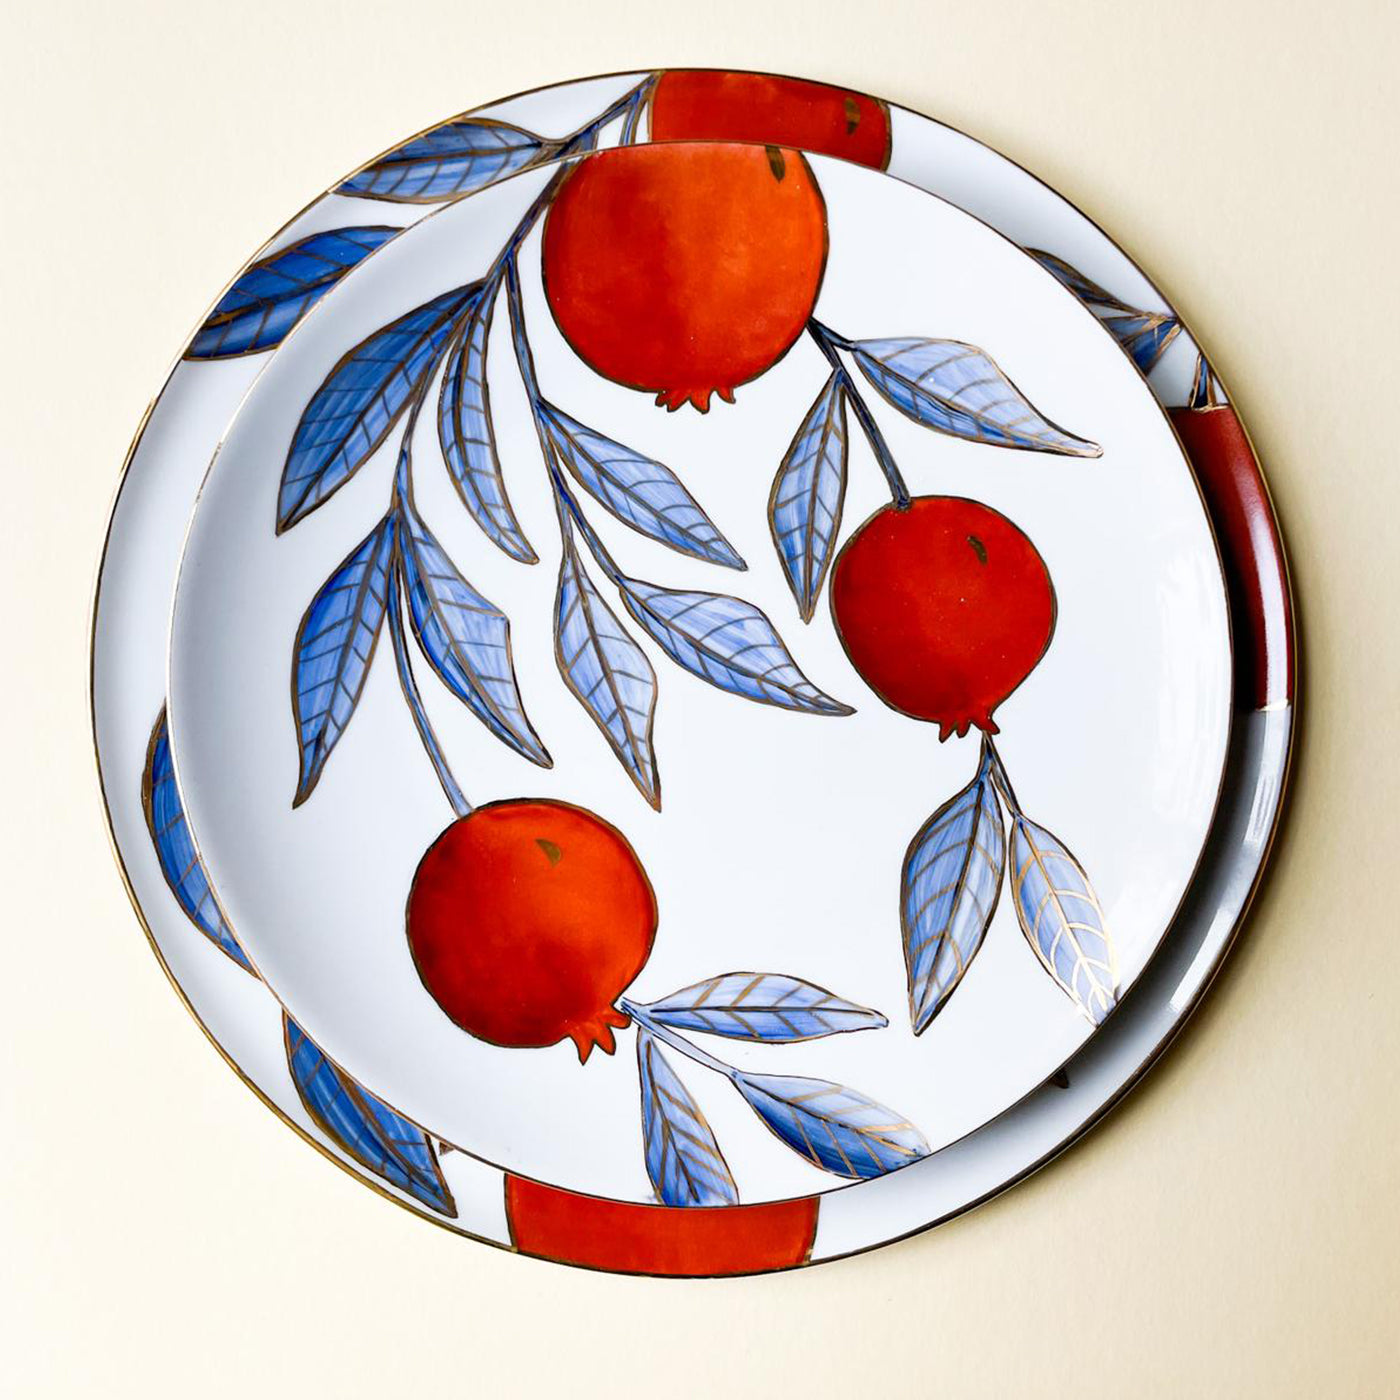 Cora Polychrome Charger Plate - Alternative view 1